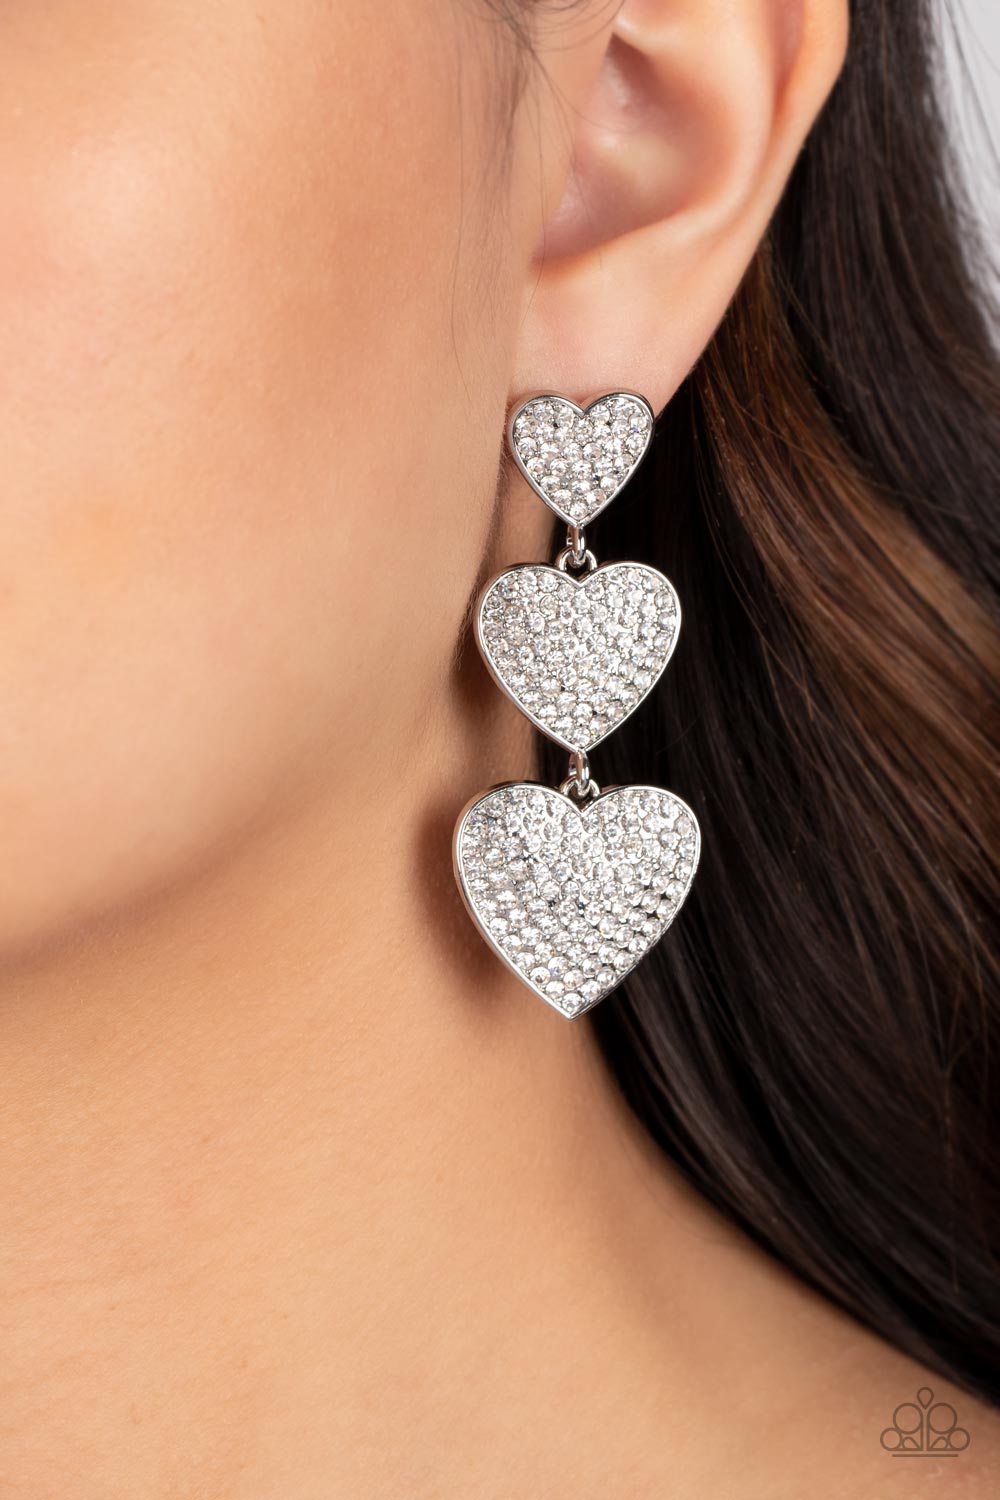 Couples Retreat White Heart Post Earring - Paparazzi Accessories  Three white rhinestone-studded silver hearts gradually increase in size as they cascade down the ear in a shimmery display. Each of the hearts interconnect to one another adding a shifting, whimsical detail to the spritz of glitz. Earring attaches to a standard post fitting.  Sold as one pair of post earrings.